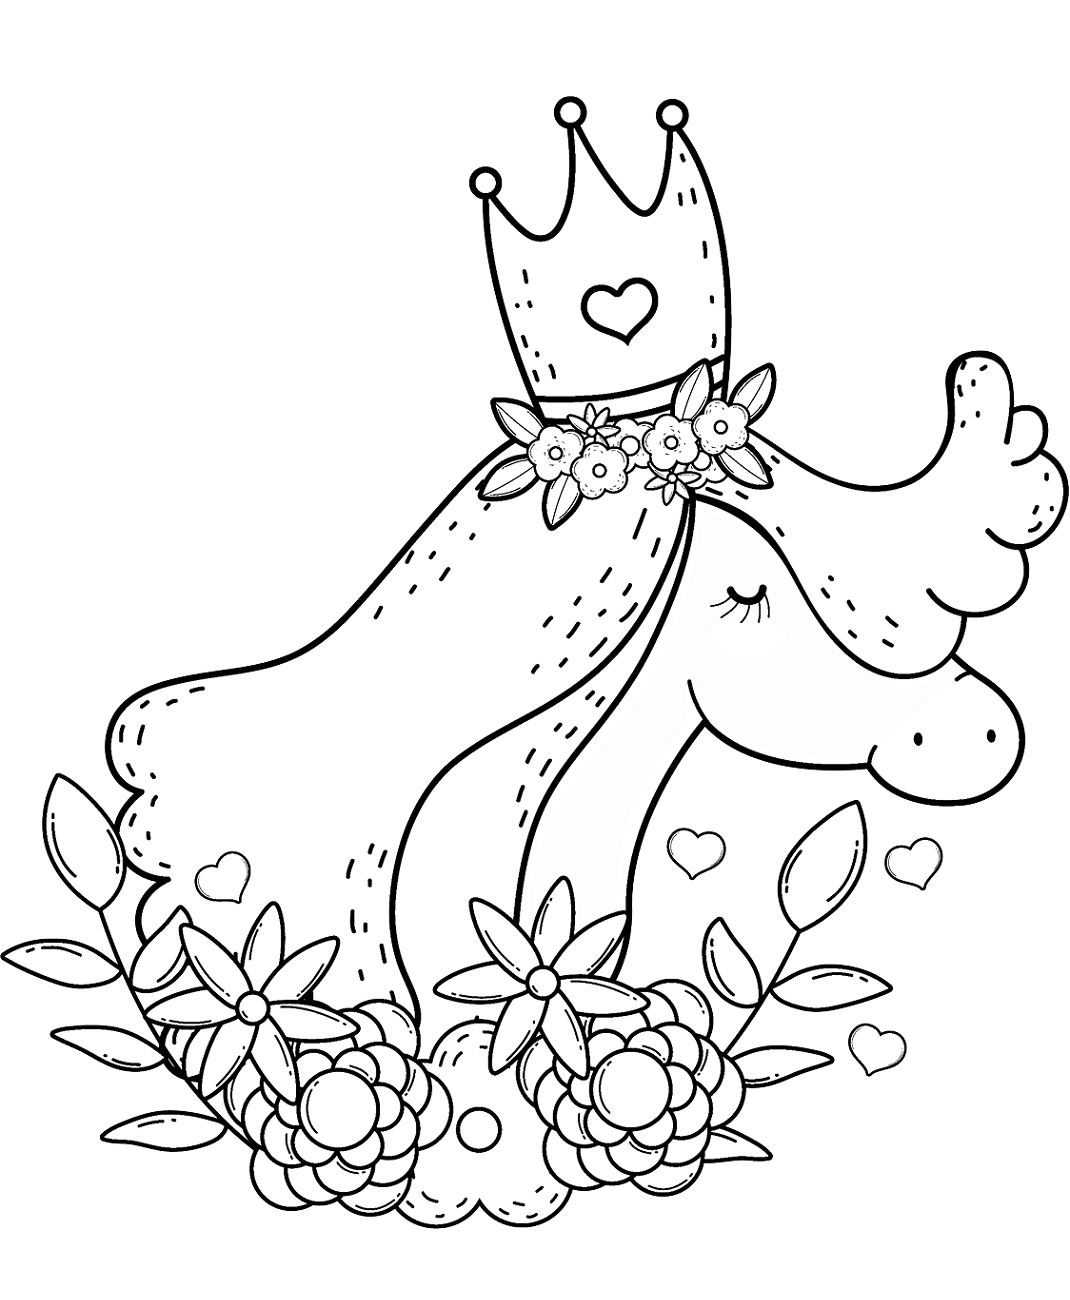 unicorn-wearing-crown-coloring-page-free-printable-coloring-pages-for